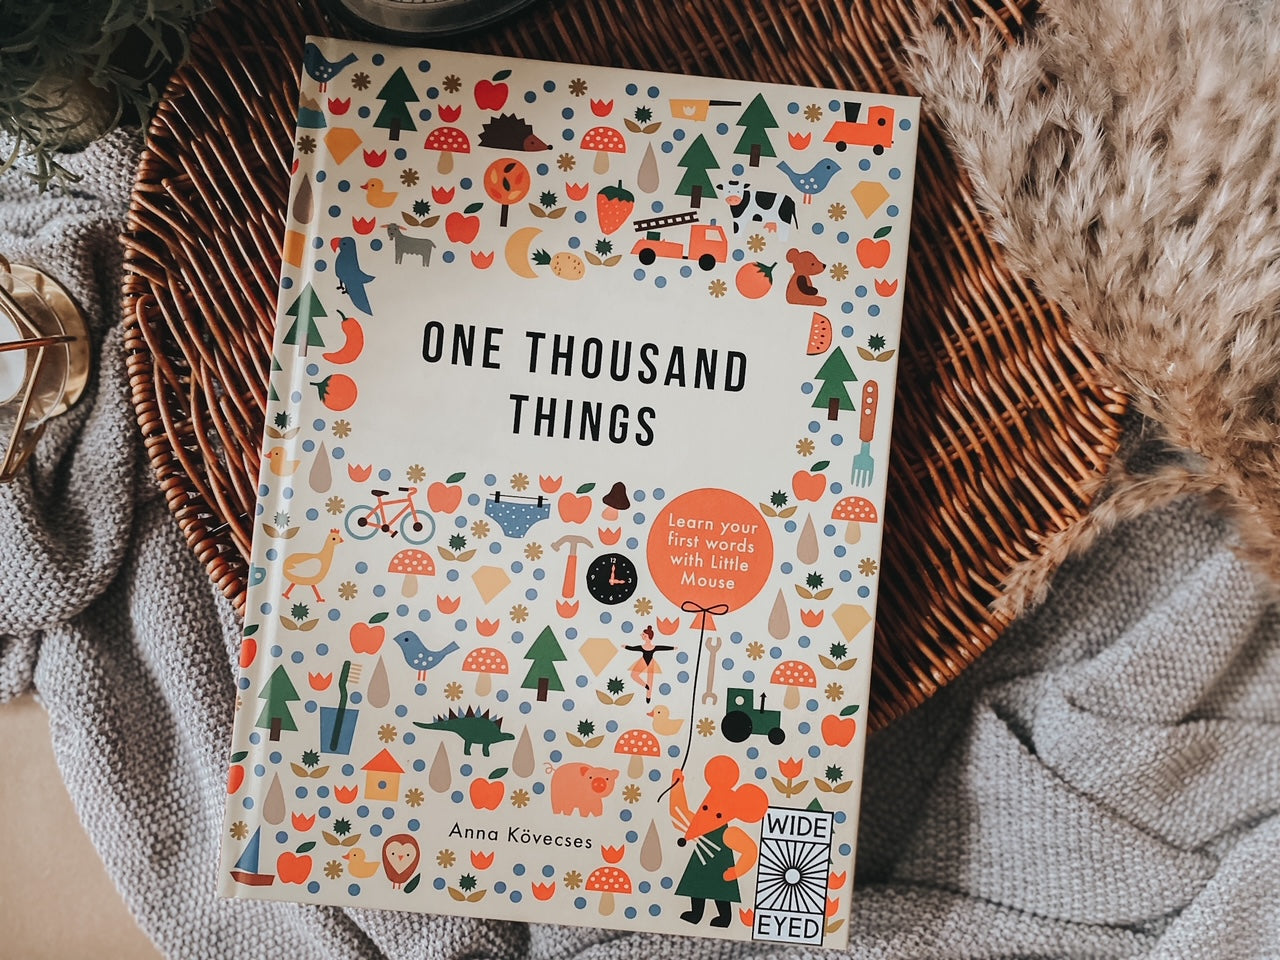 One Thousand Things